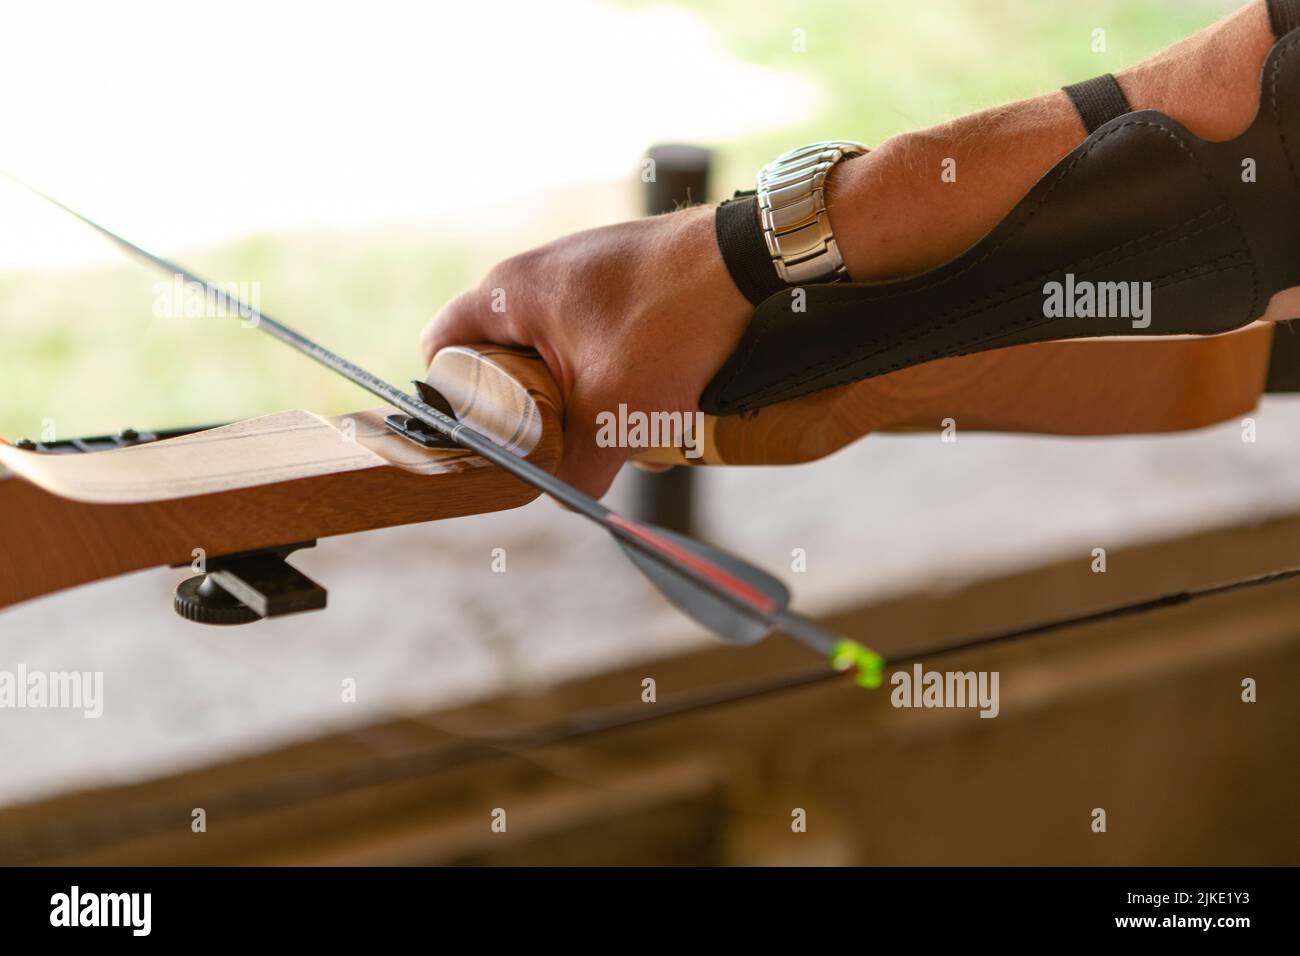 Hand holding a bow and arrow Stock Photo